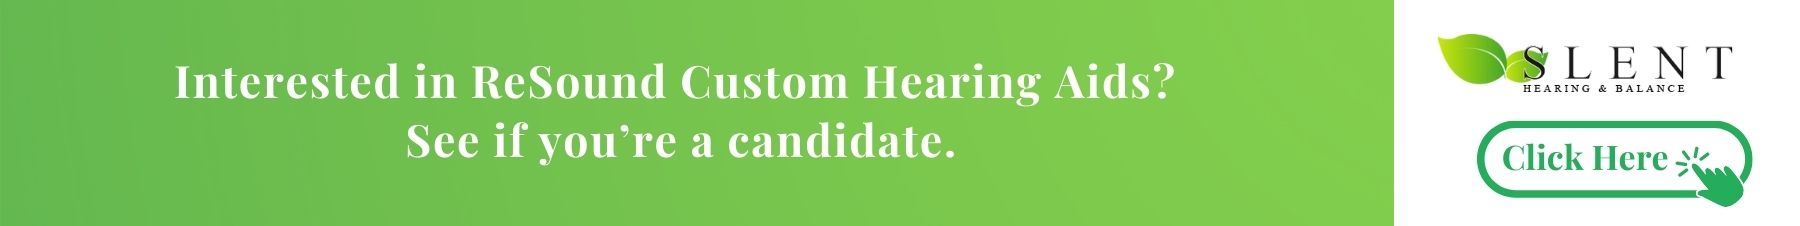 Interested in ReSound Custom Hearing Aids? See if you’re a candidate